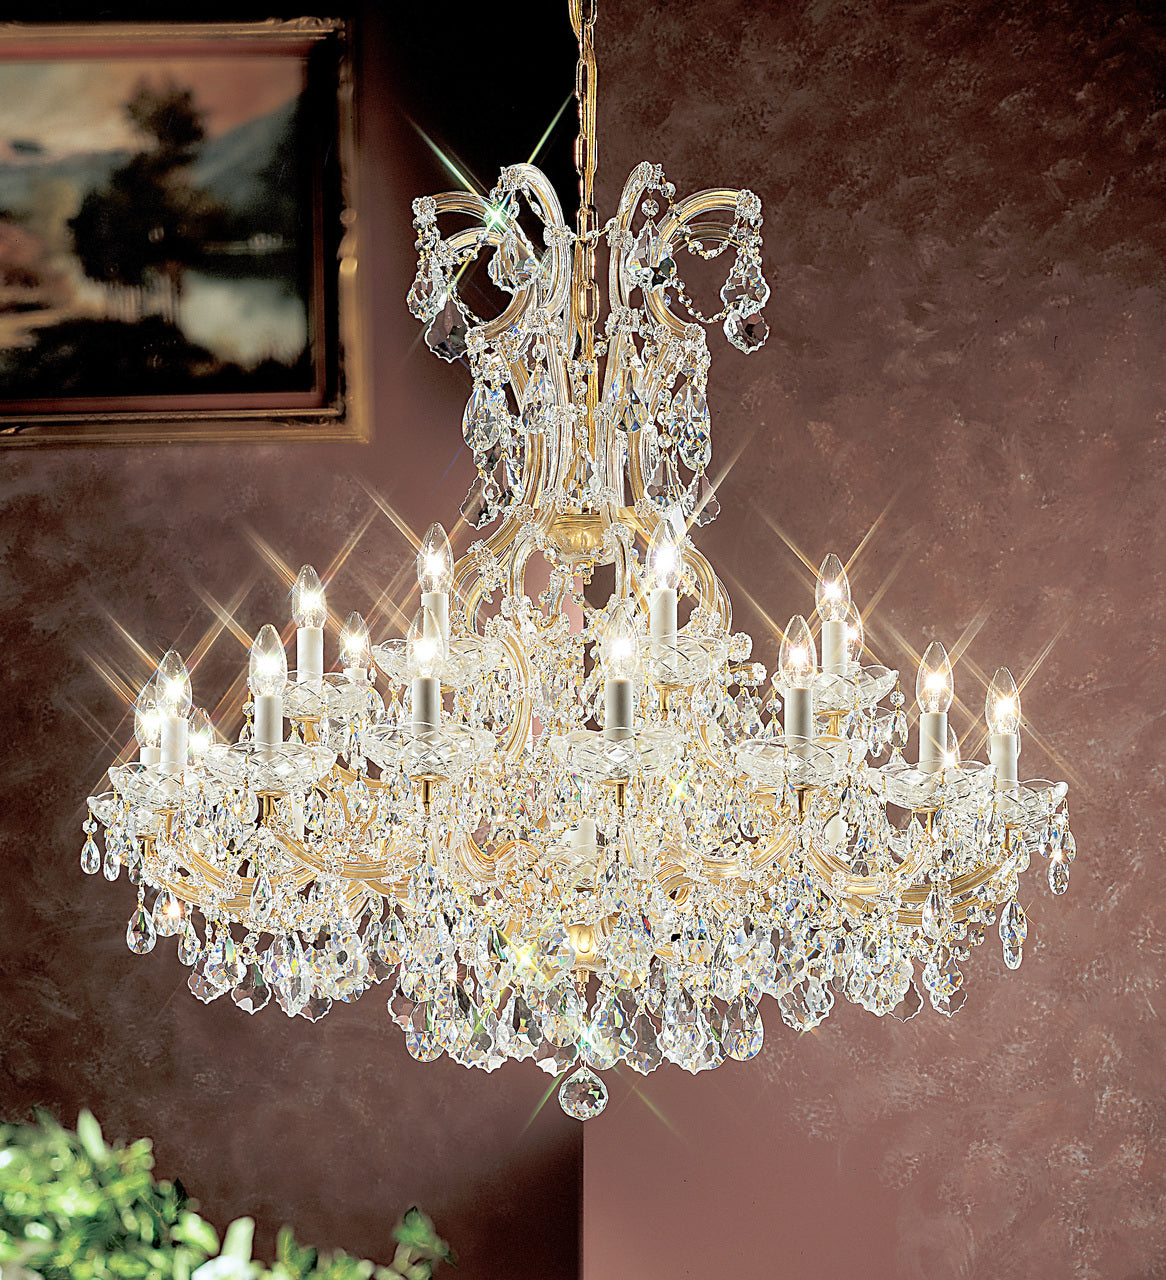 Classic Lighting 8159 OWG SC Maria Theresa Traditional Crystal Chandelier in Olde World Gold (Imported from Italy)